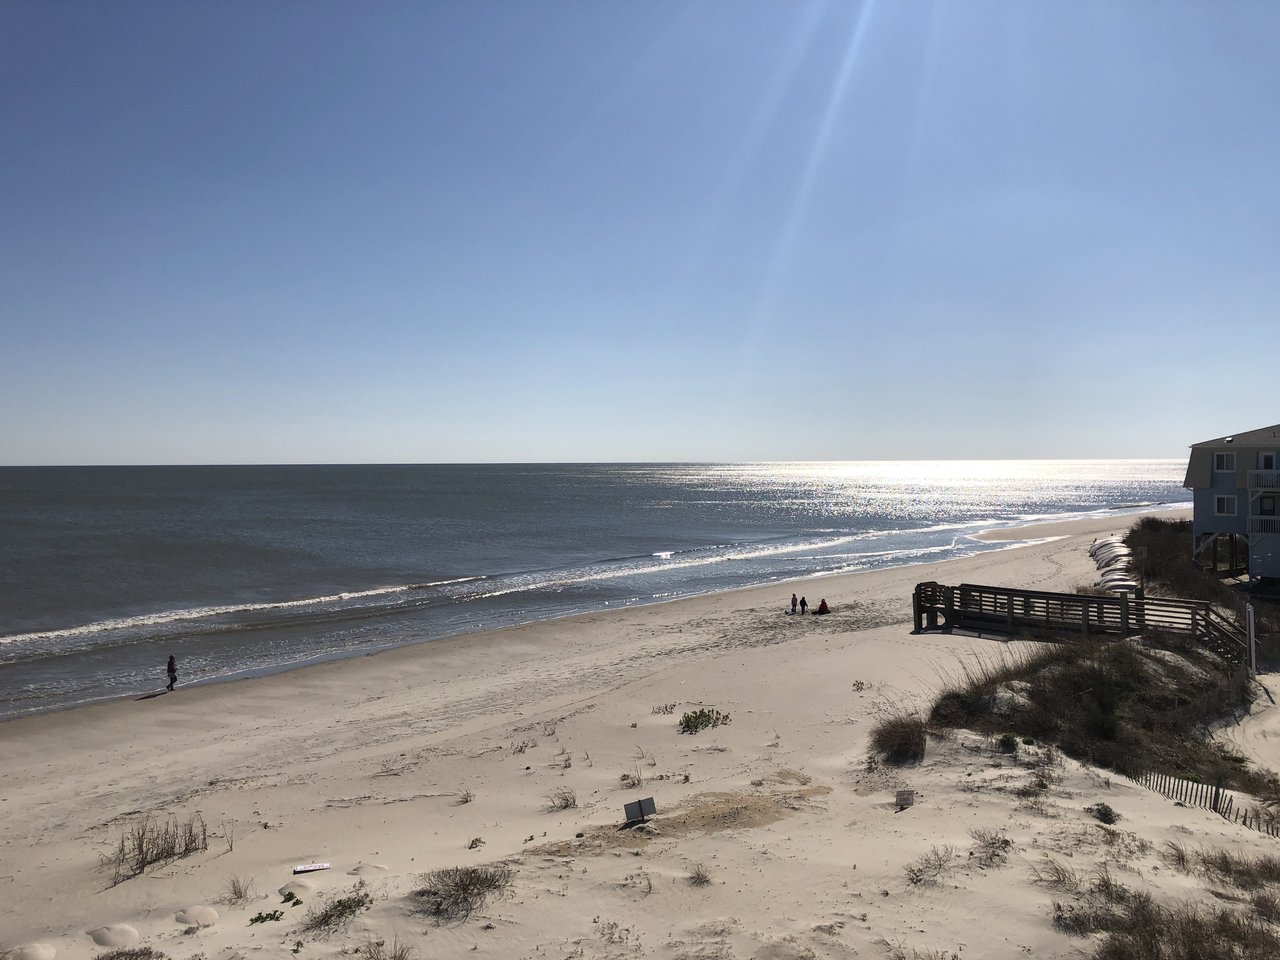 Like most beaches in North Carolina, Ocean Isle Beach experiences coastal erosion. Sea level rise accelerates and exacerbates the natural coastal erosion that's continually taking place here and at beaches around the world. Credit: NASA/JPL-Caltech